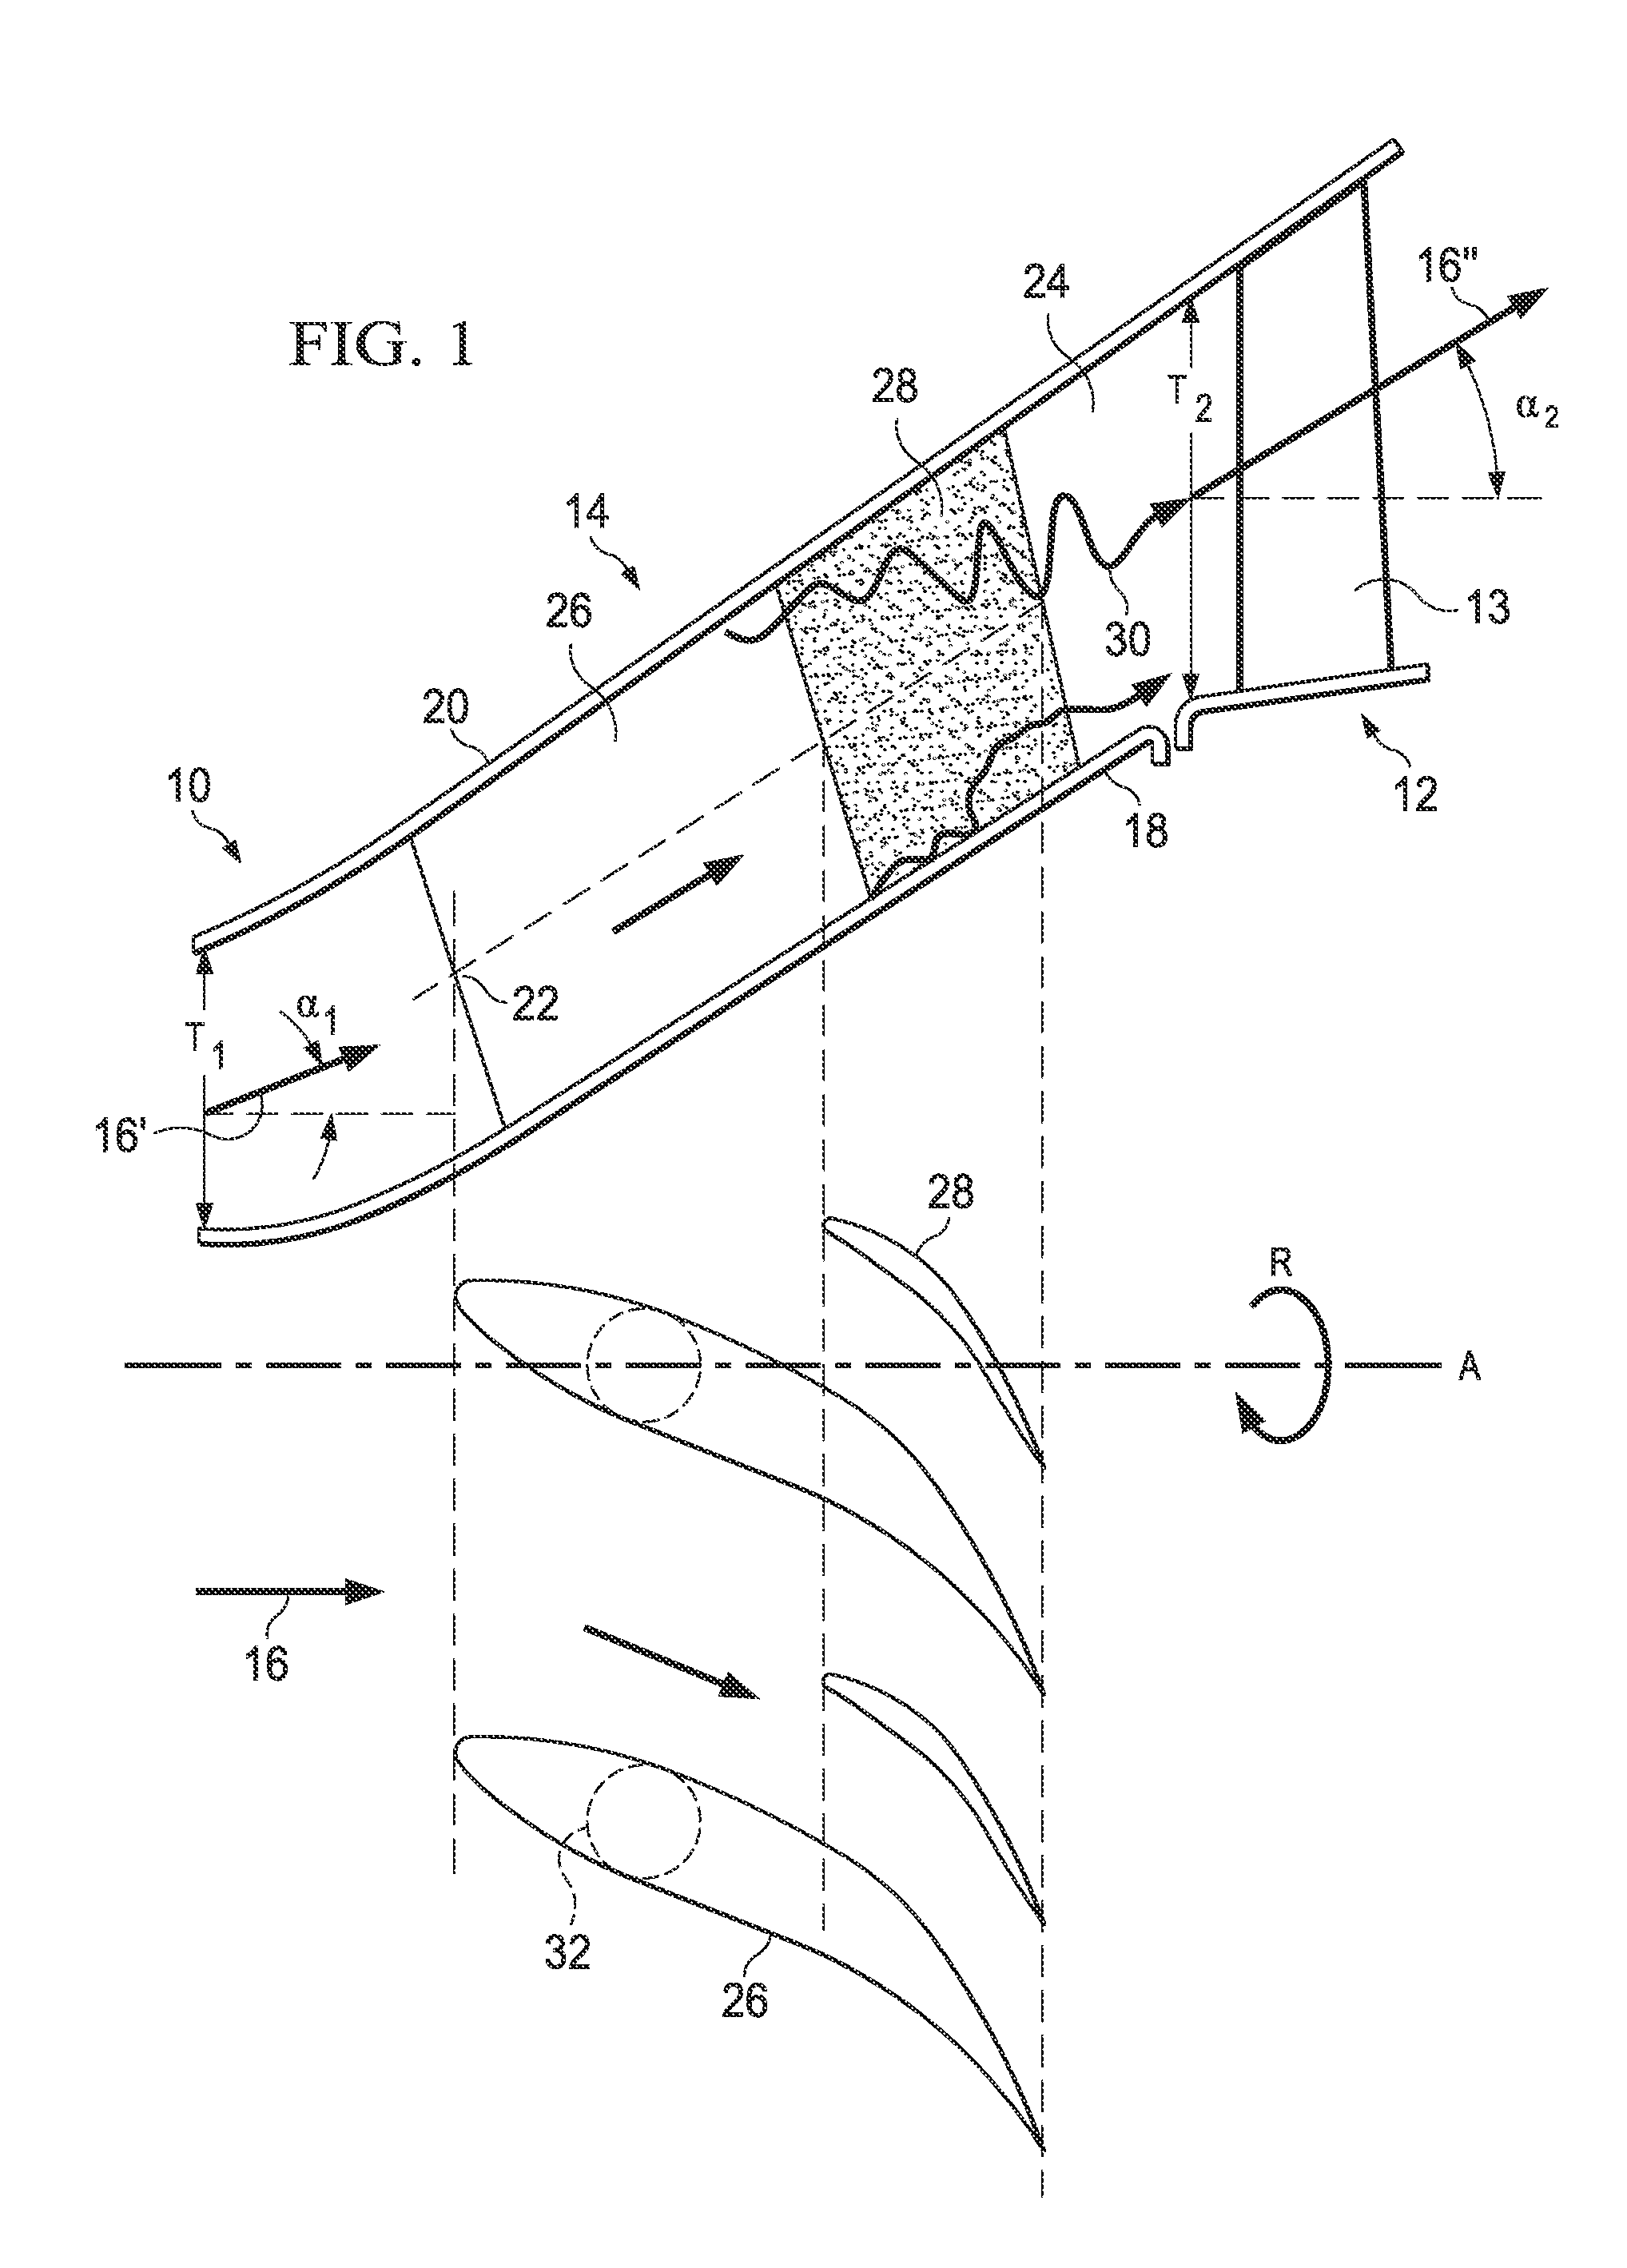 Transition channel of a turbine unit